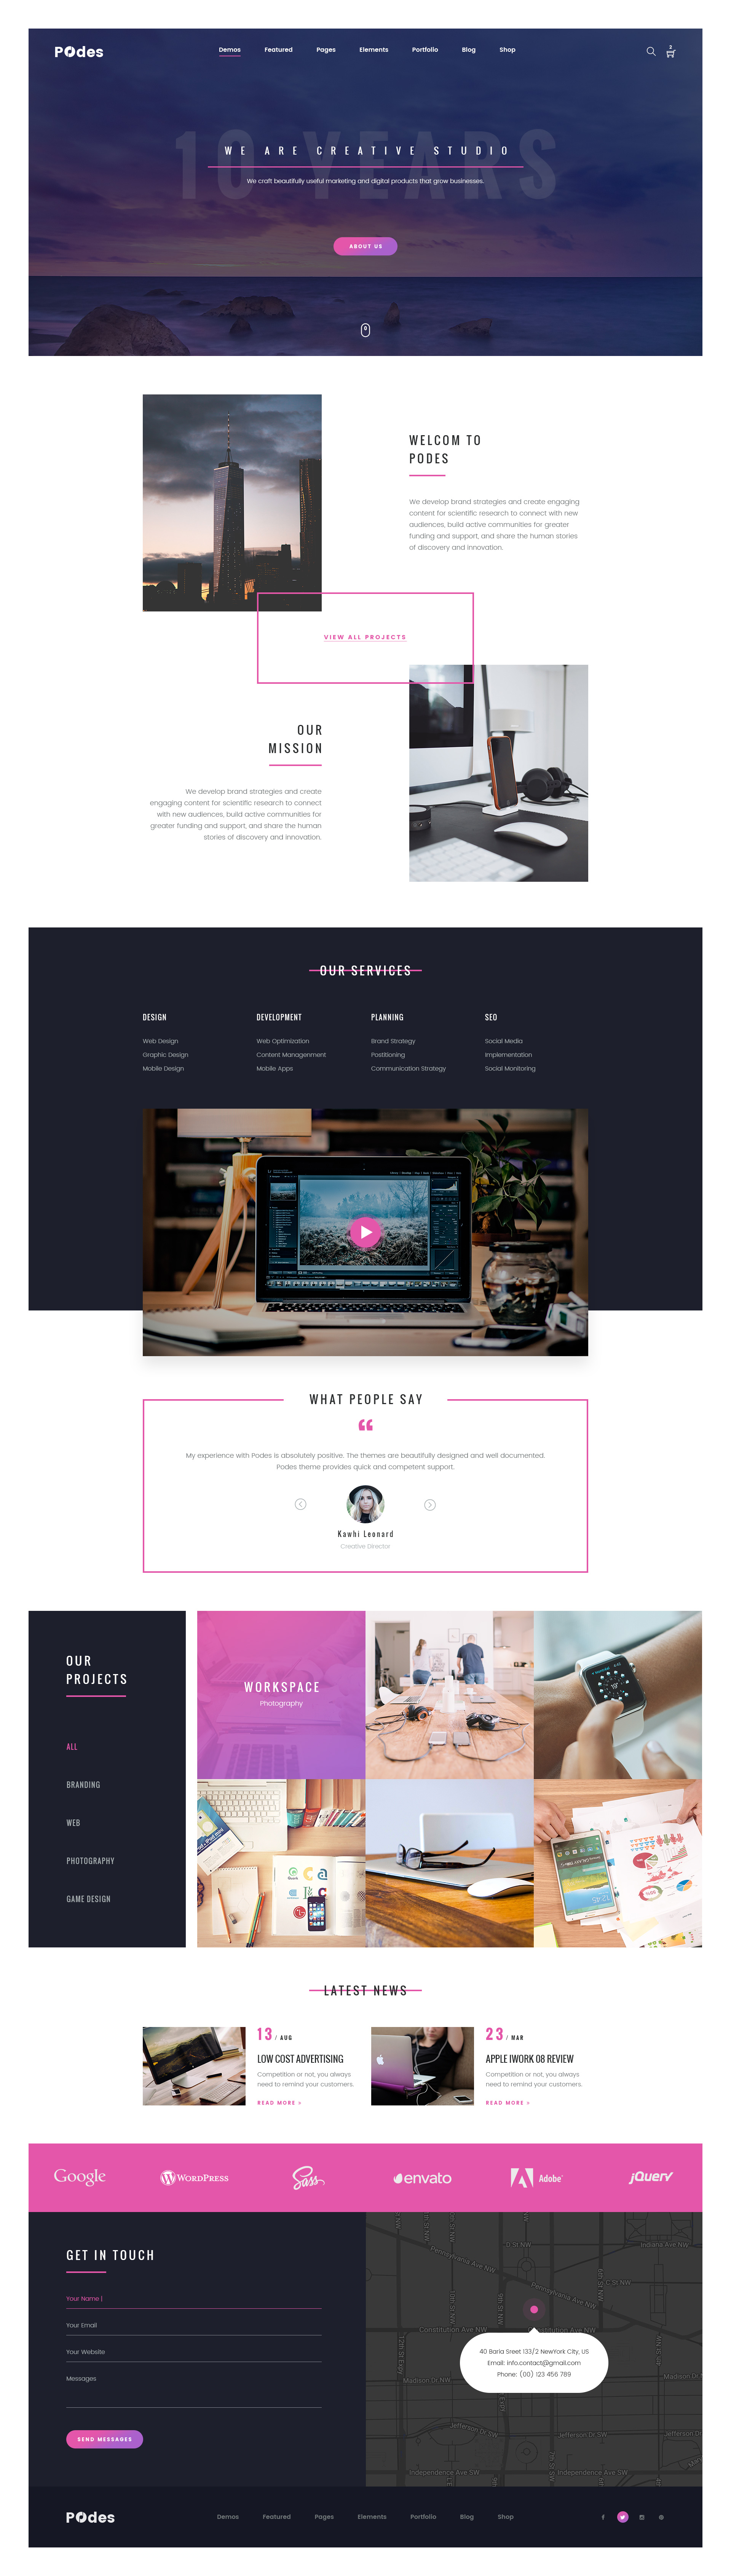 Podes, Responsive Multi-Purpose PSD Template by Avitex